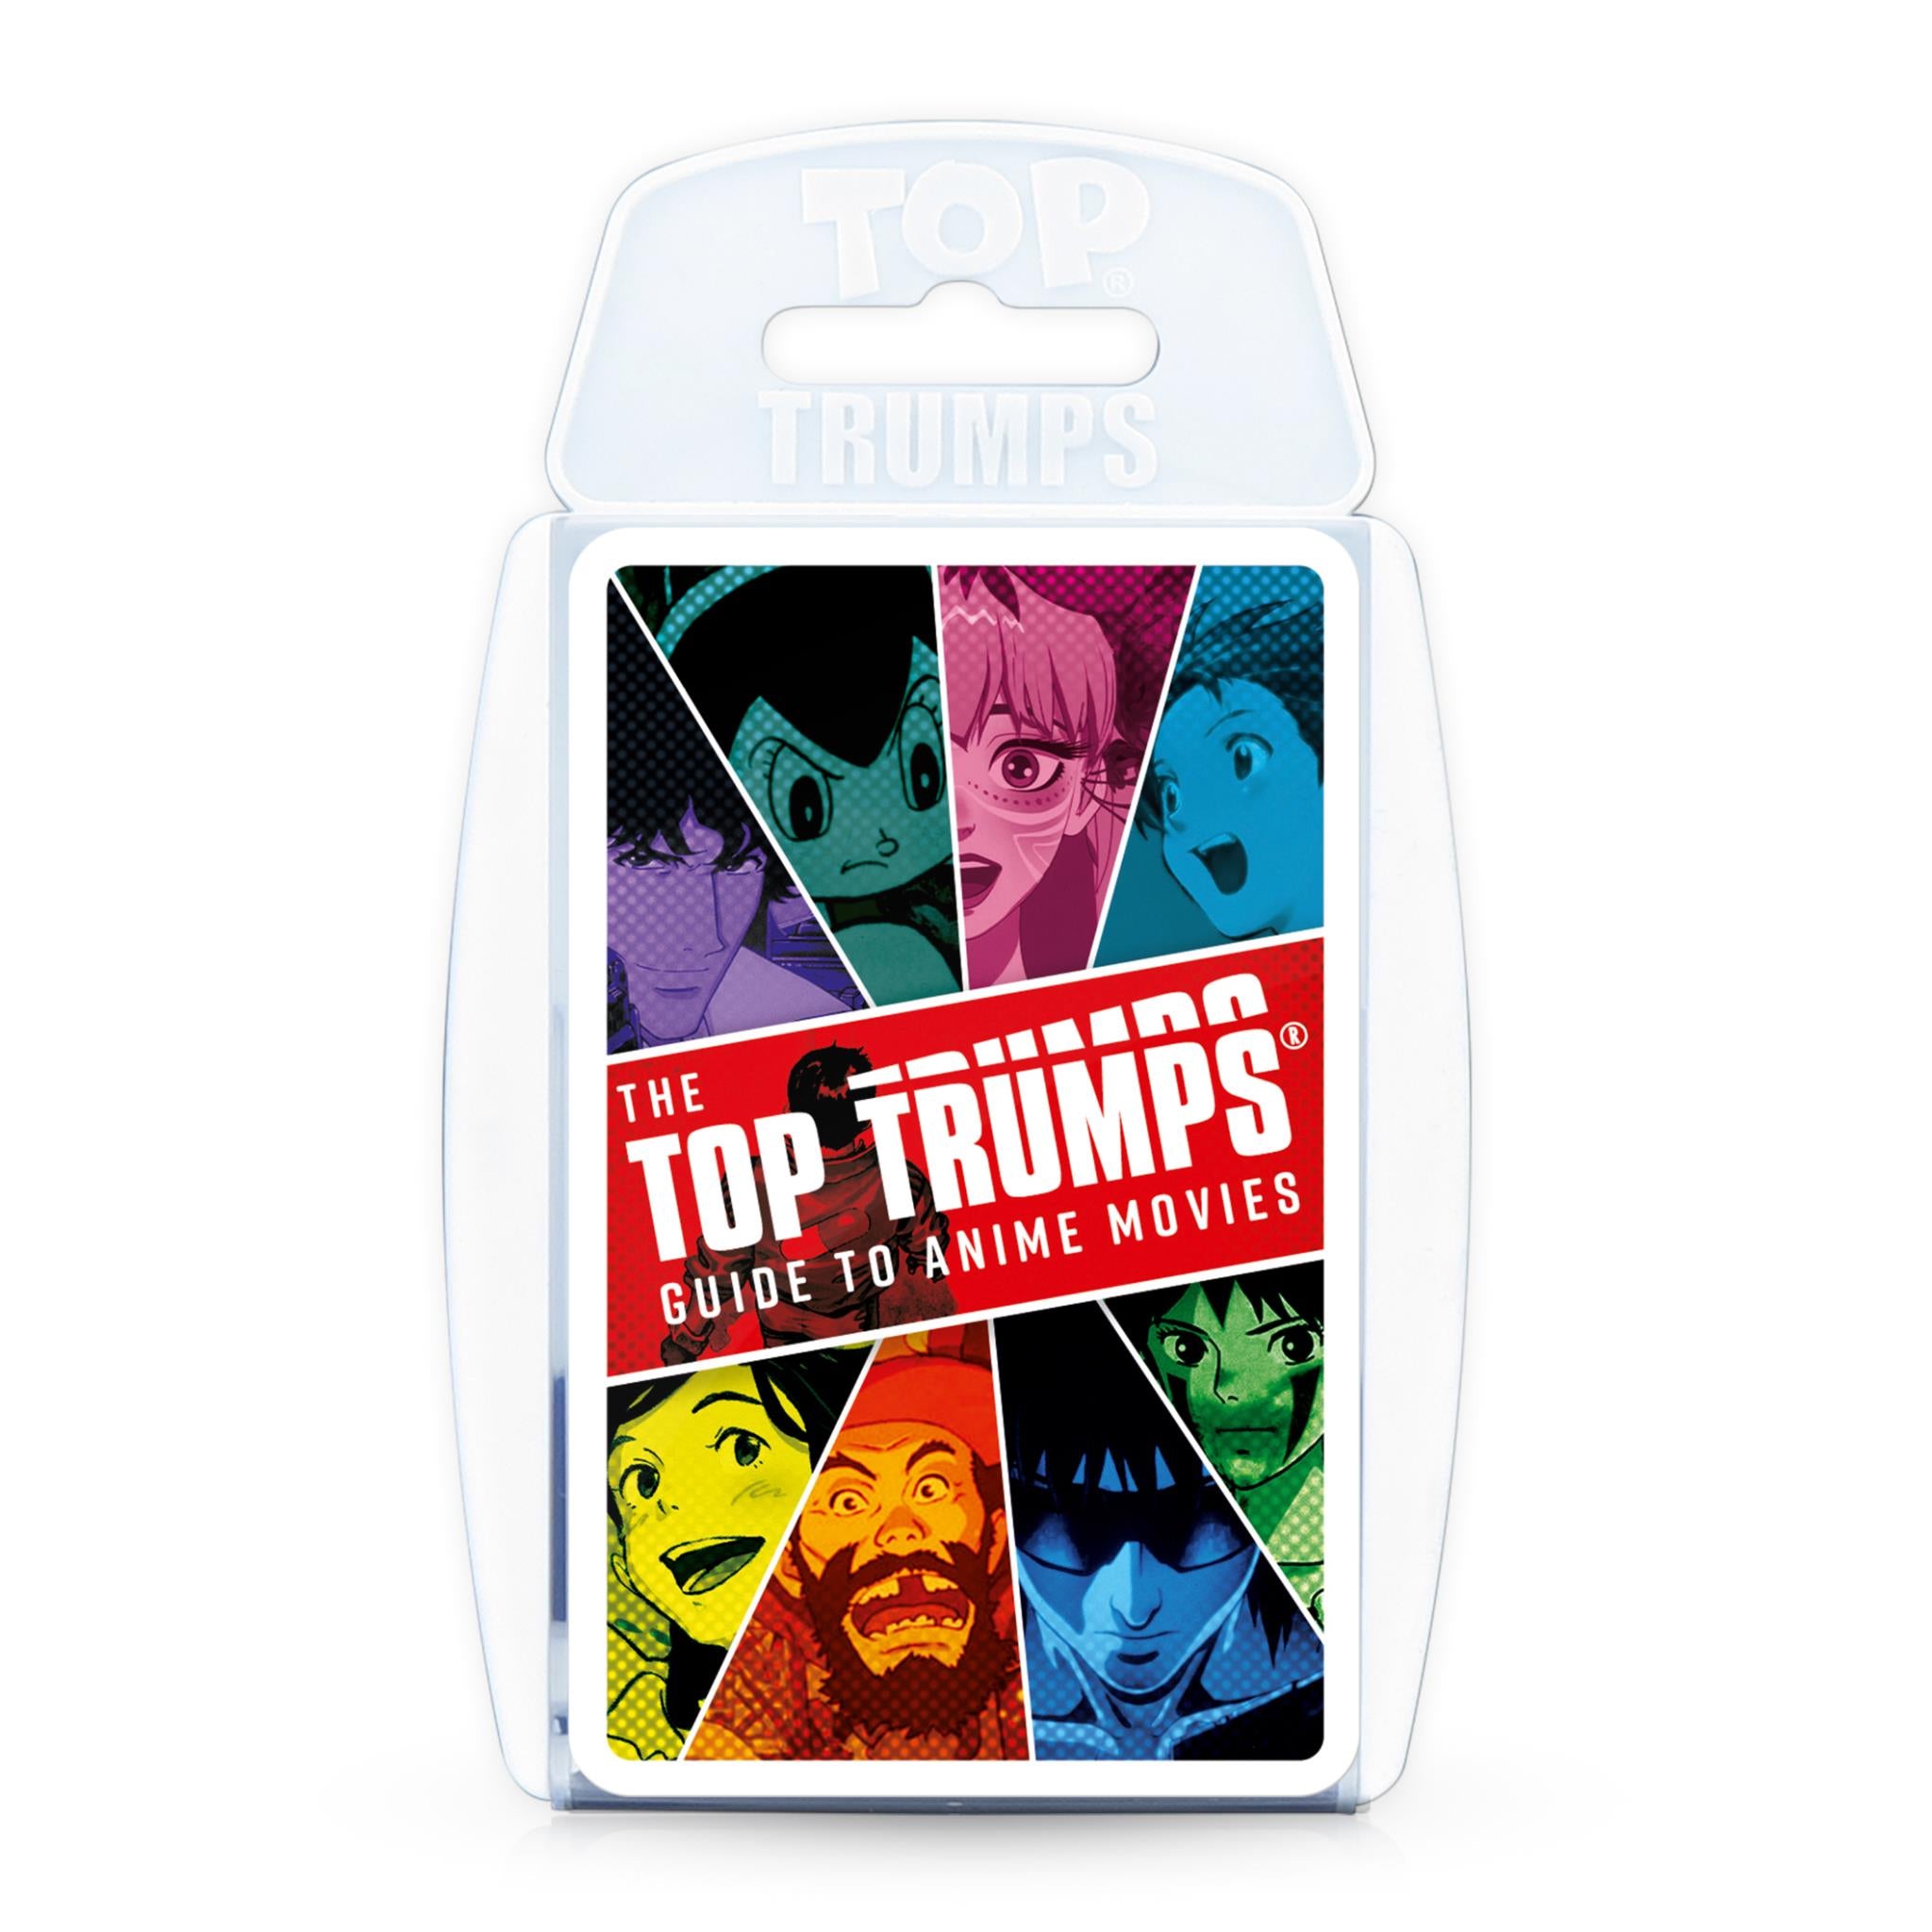 top trumps - guide to anime